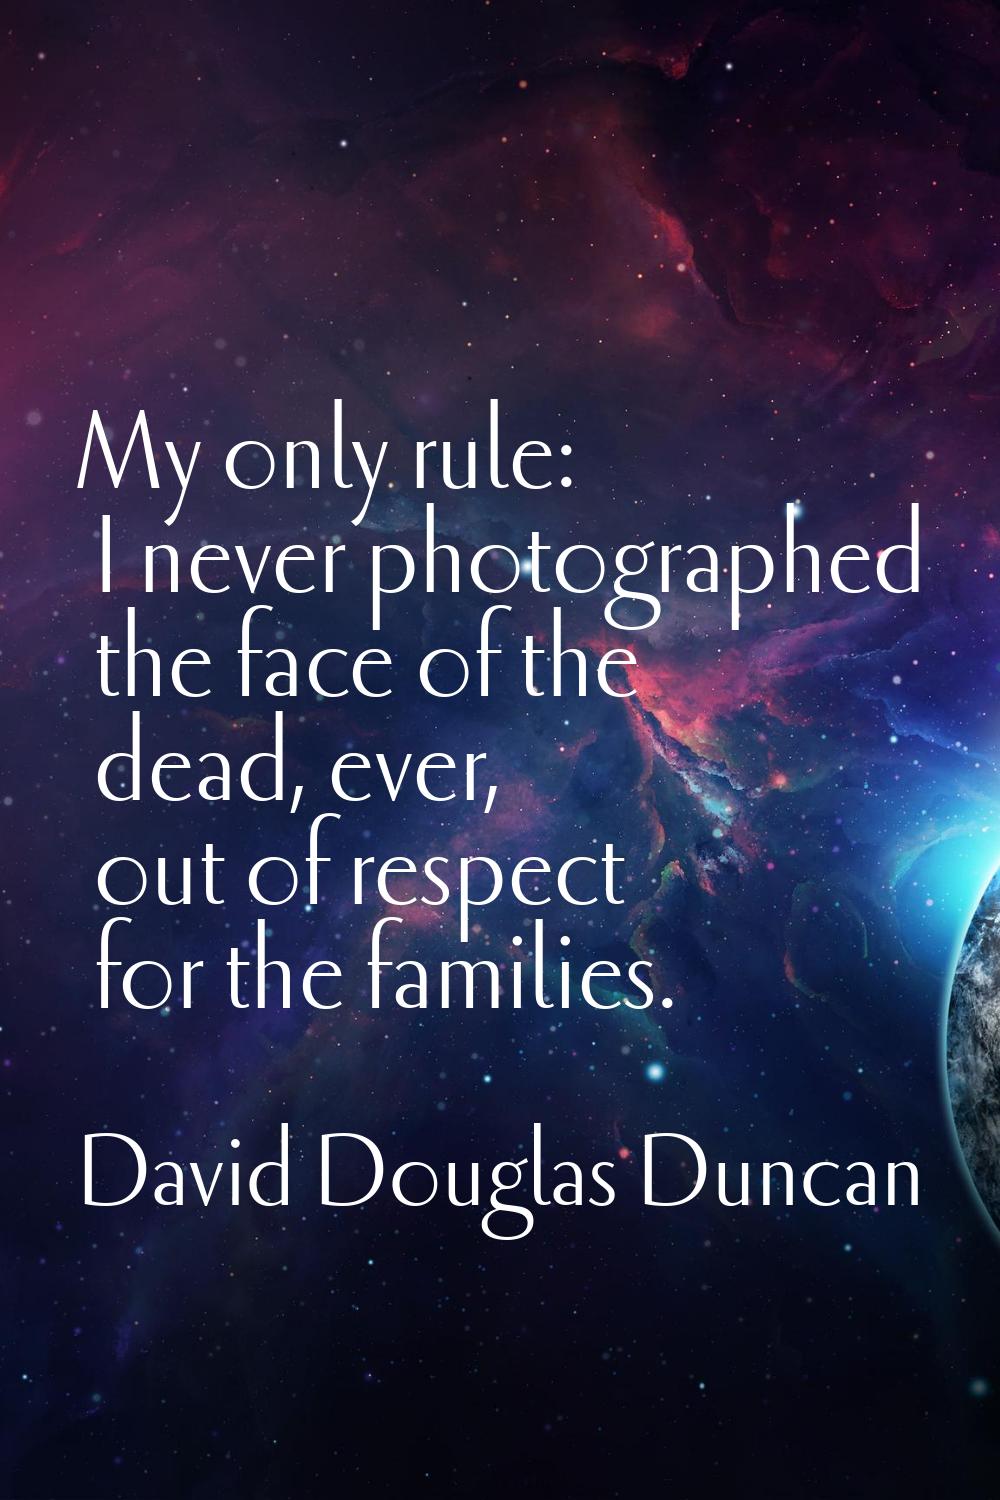 My only rule: I never photographed the face of the dead, ever, out of respect for the families.